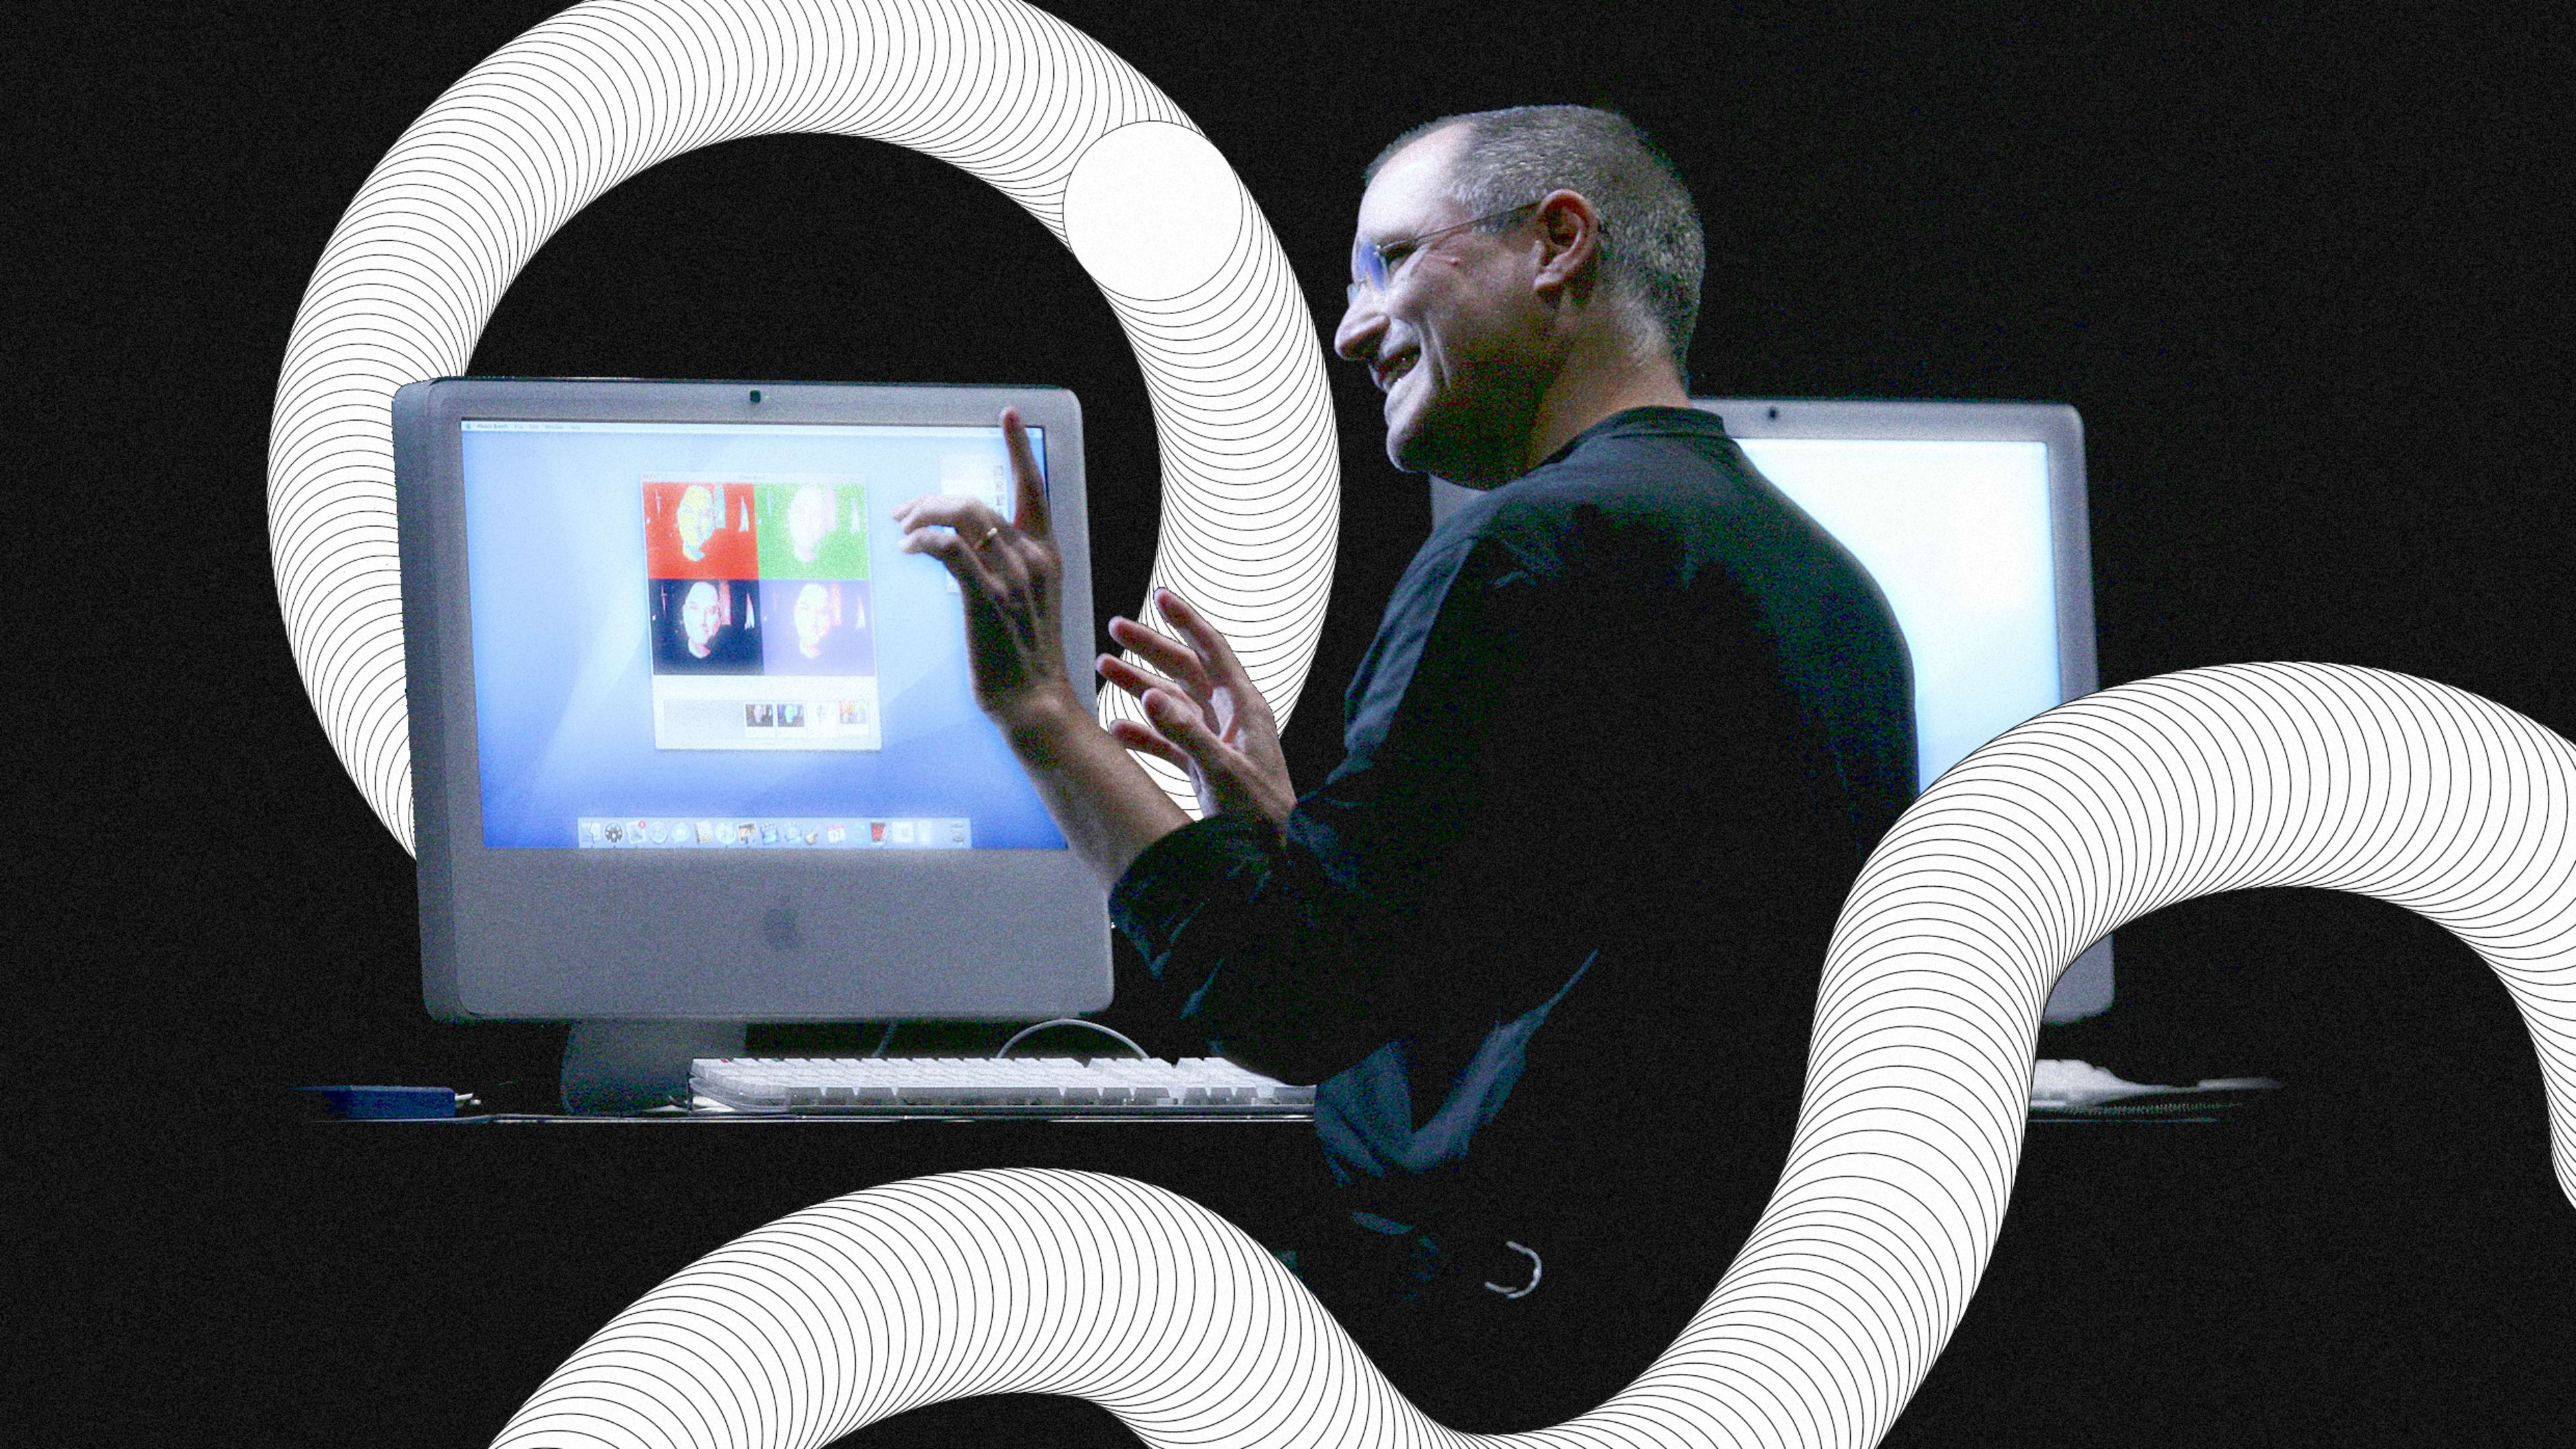 The ingenious way Steve Jobs led design reviews at Apple